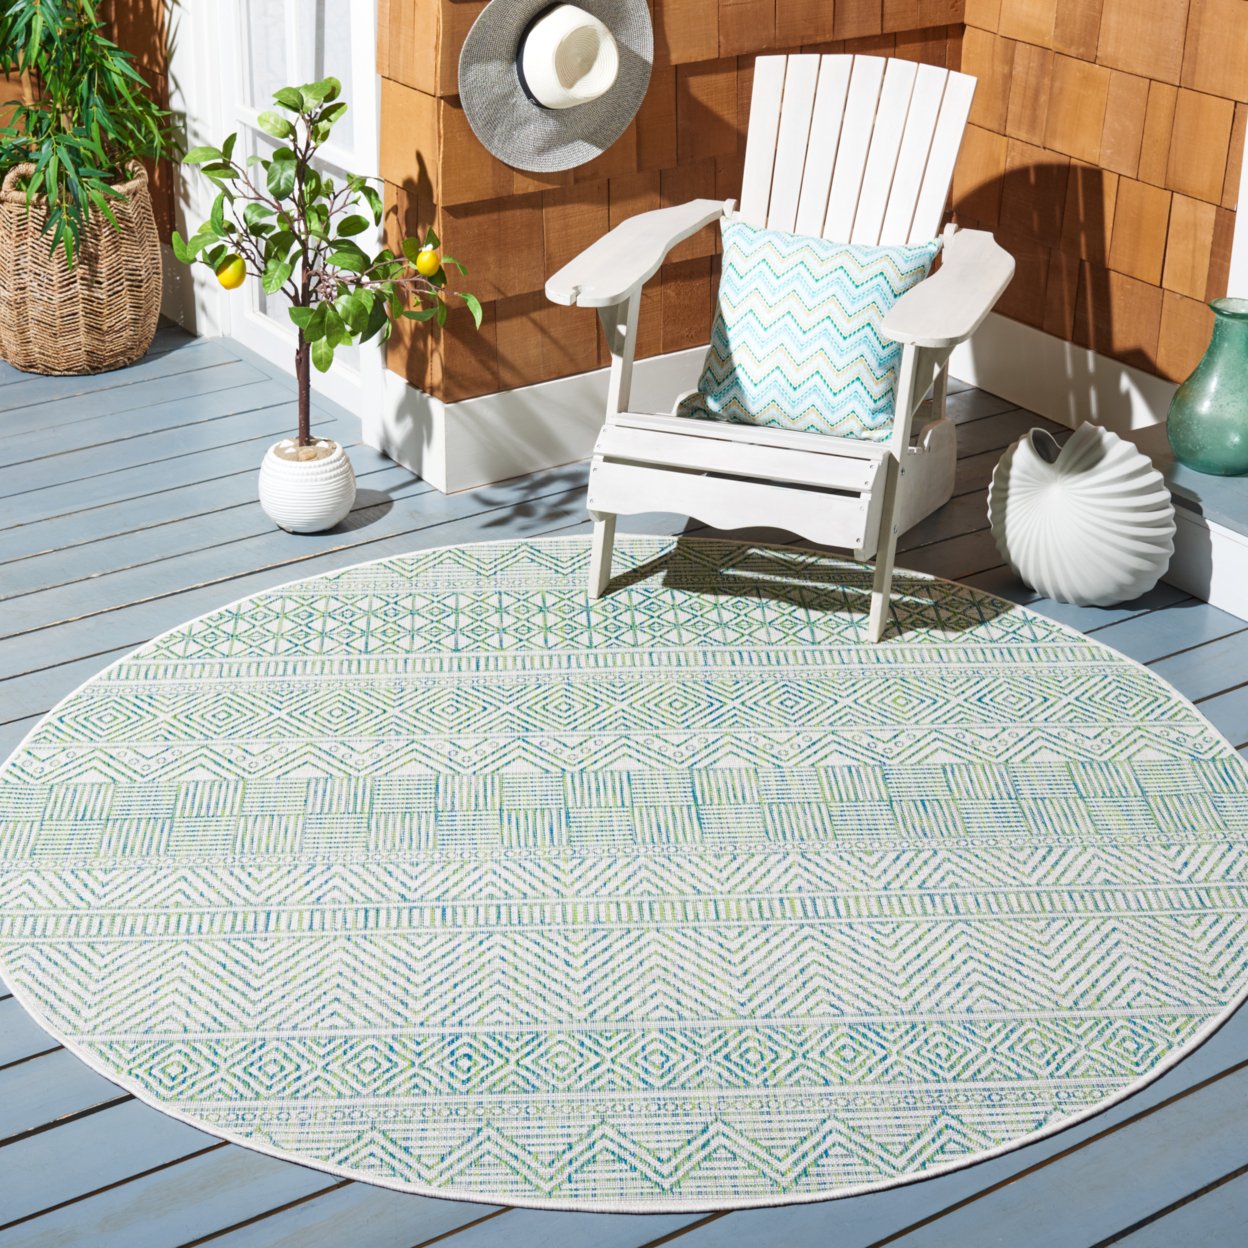 SAFAVIEH Outdoor CY8196-53512 Courtyard Ivory / Turquoise Rug - 4' X 5' 7